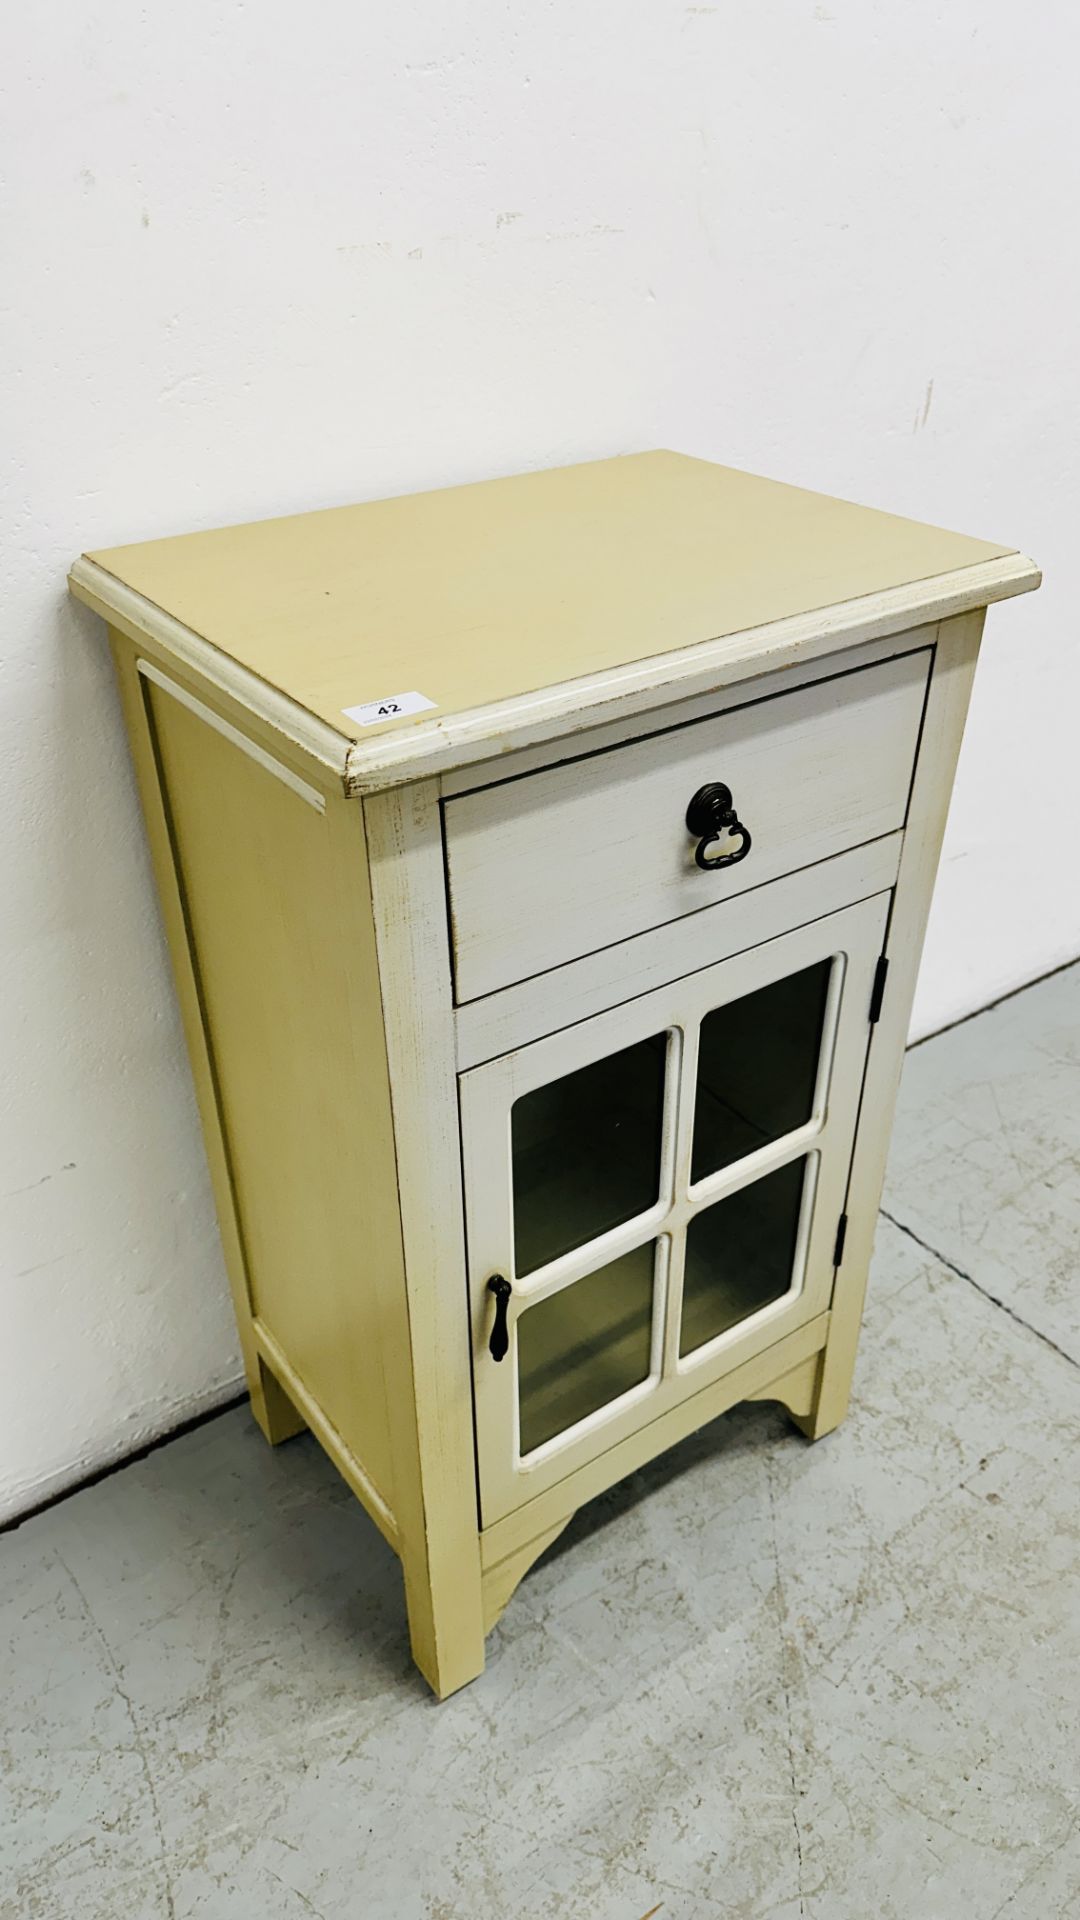 VINTAGE TYPE SINGLE DOOR CABINET WITH DRAWER ABOVE - W 46CM X D 33CM X H 78CM. - Image 5 of 7